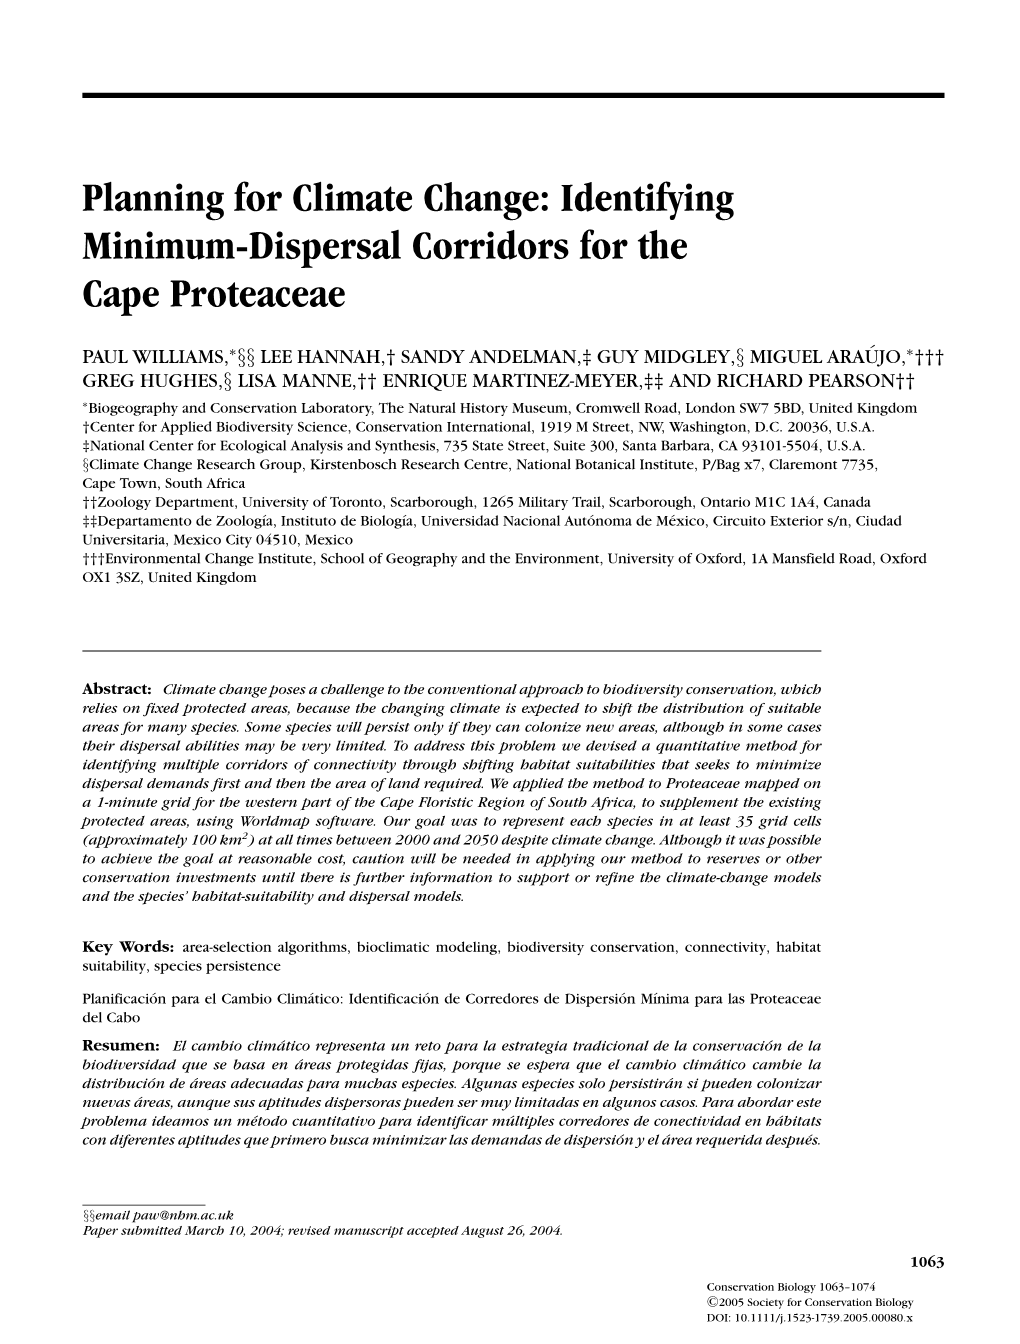 Planning for Climate Change: Identifying Minimum-Dispersal Corridors for the Cape Proteaceae